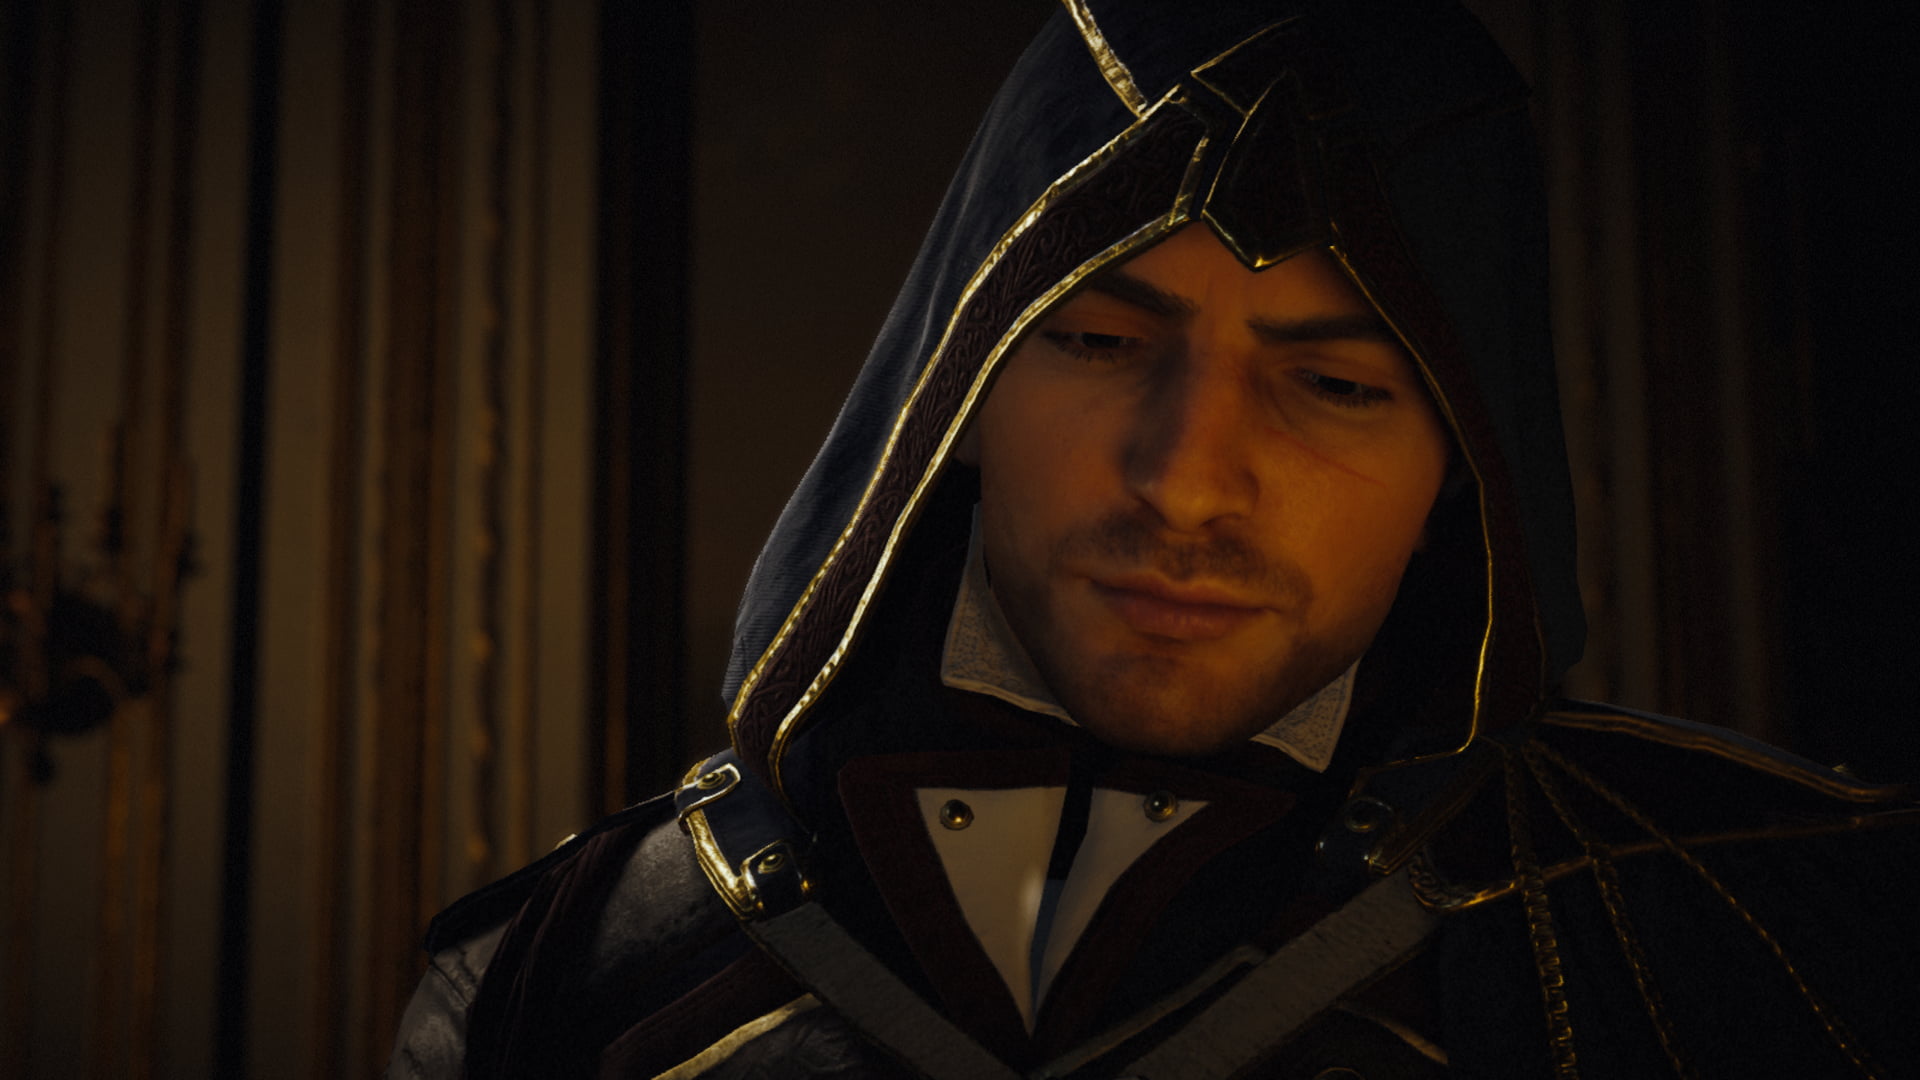 man wearing black hood 3D wallpaper, video games, Assassin's Creed, Assassin's Creed:  Unity, Assassin's Creed Unity: Dead Kings